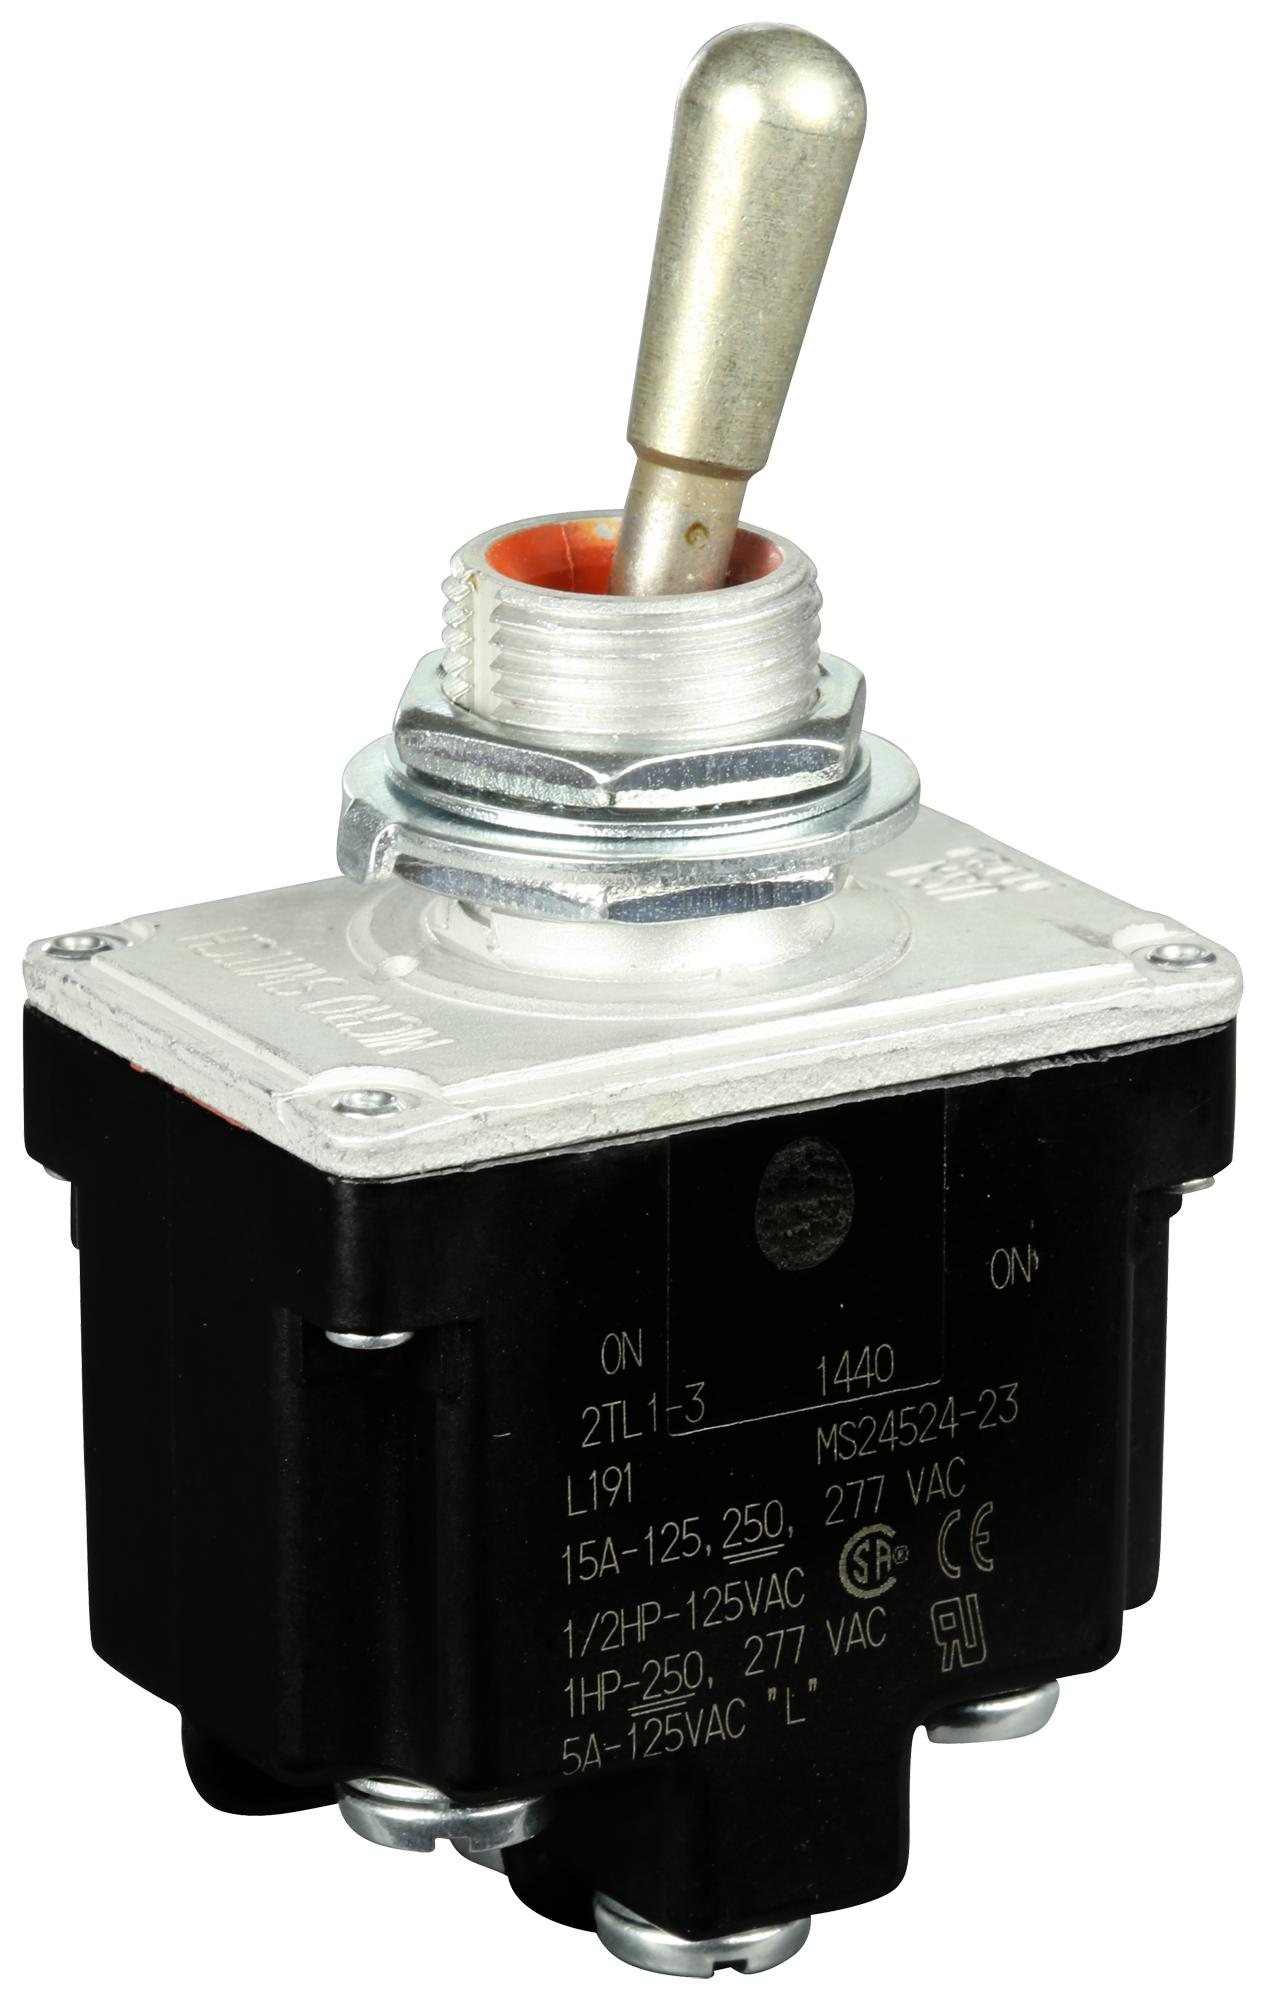 2TL1-3 TOGGLE SWITCH, 2POLE, ON-ON HONEYWELL